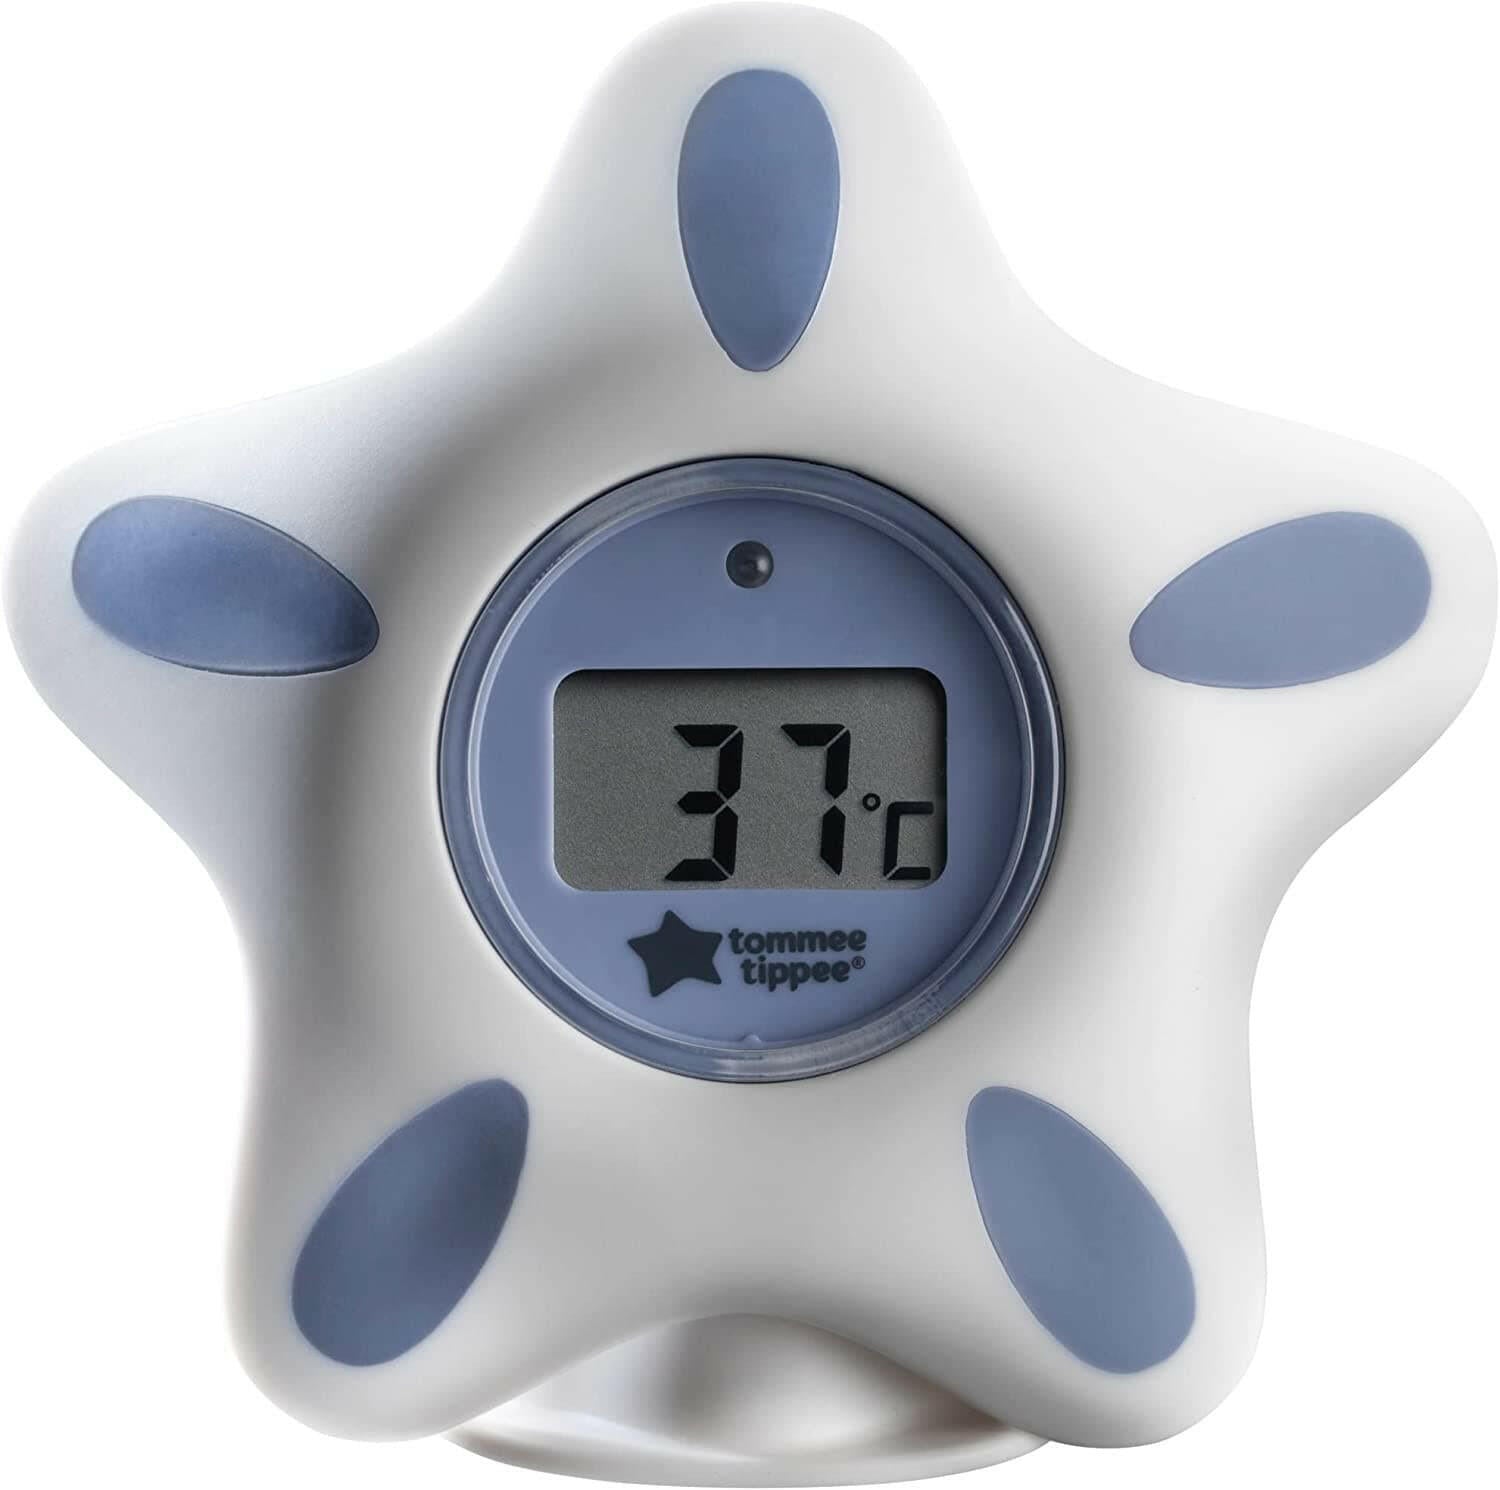 Bath and Room Thermometer by Tommee Tippee.